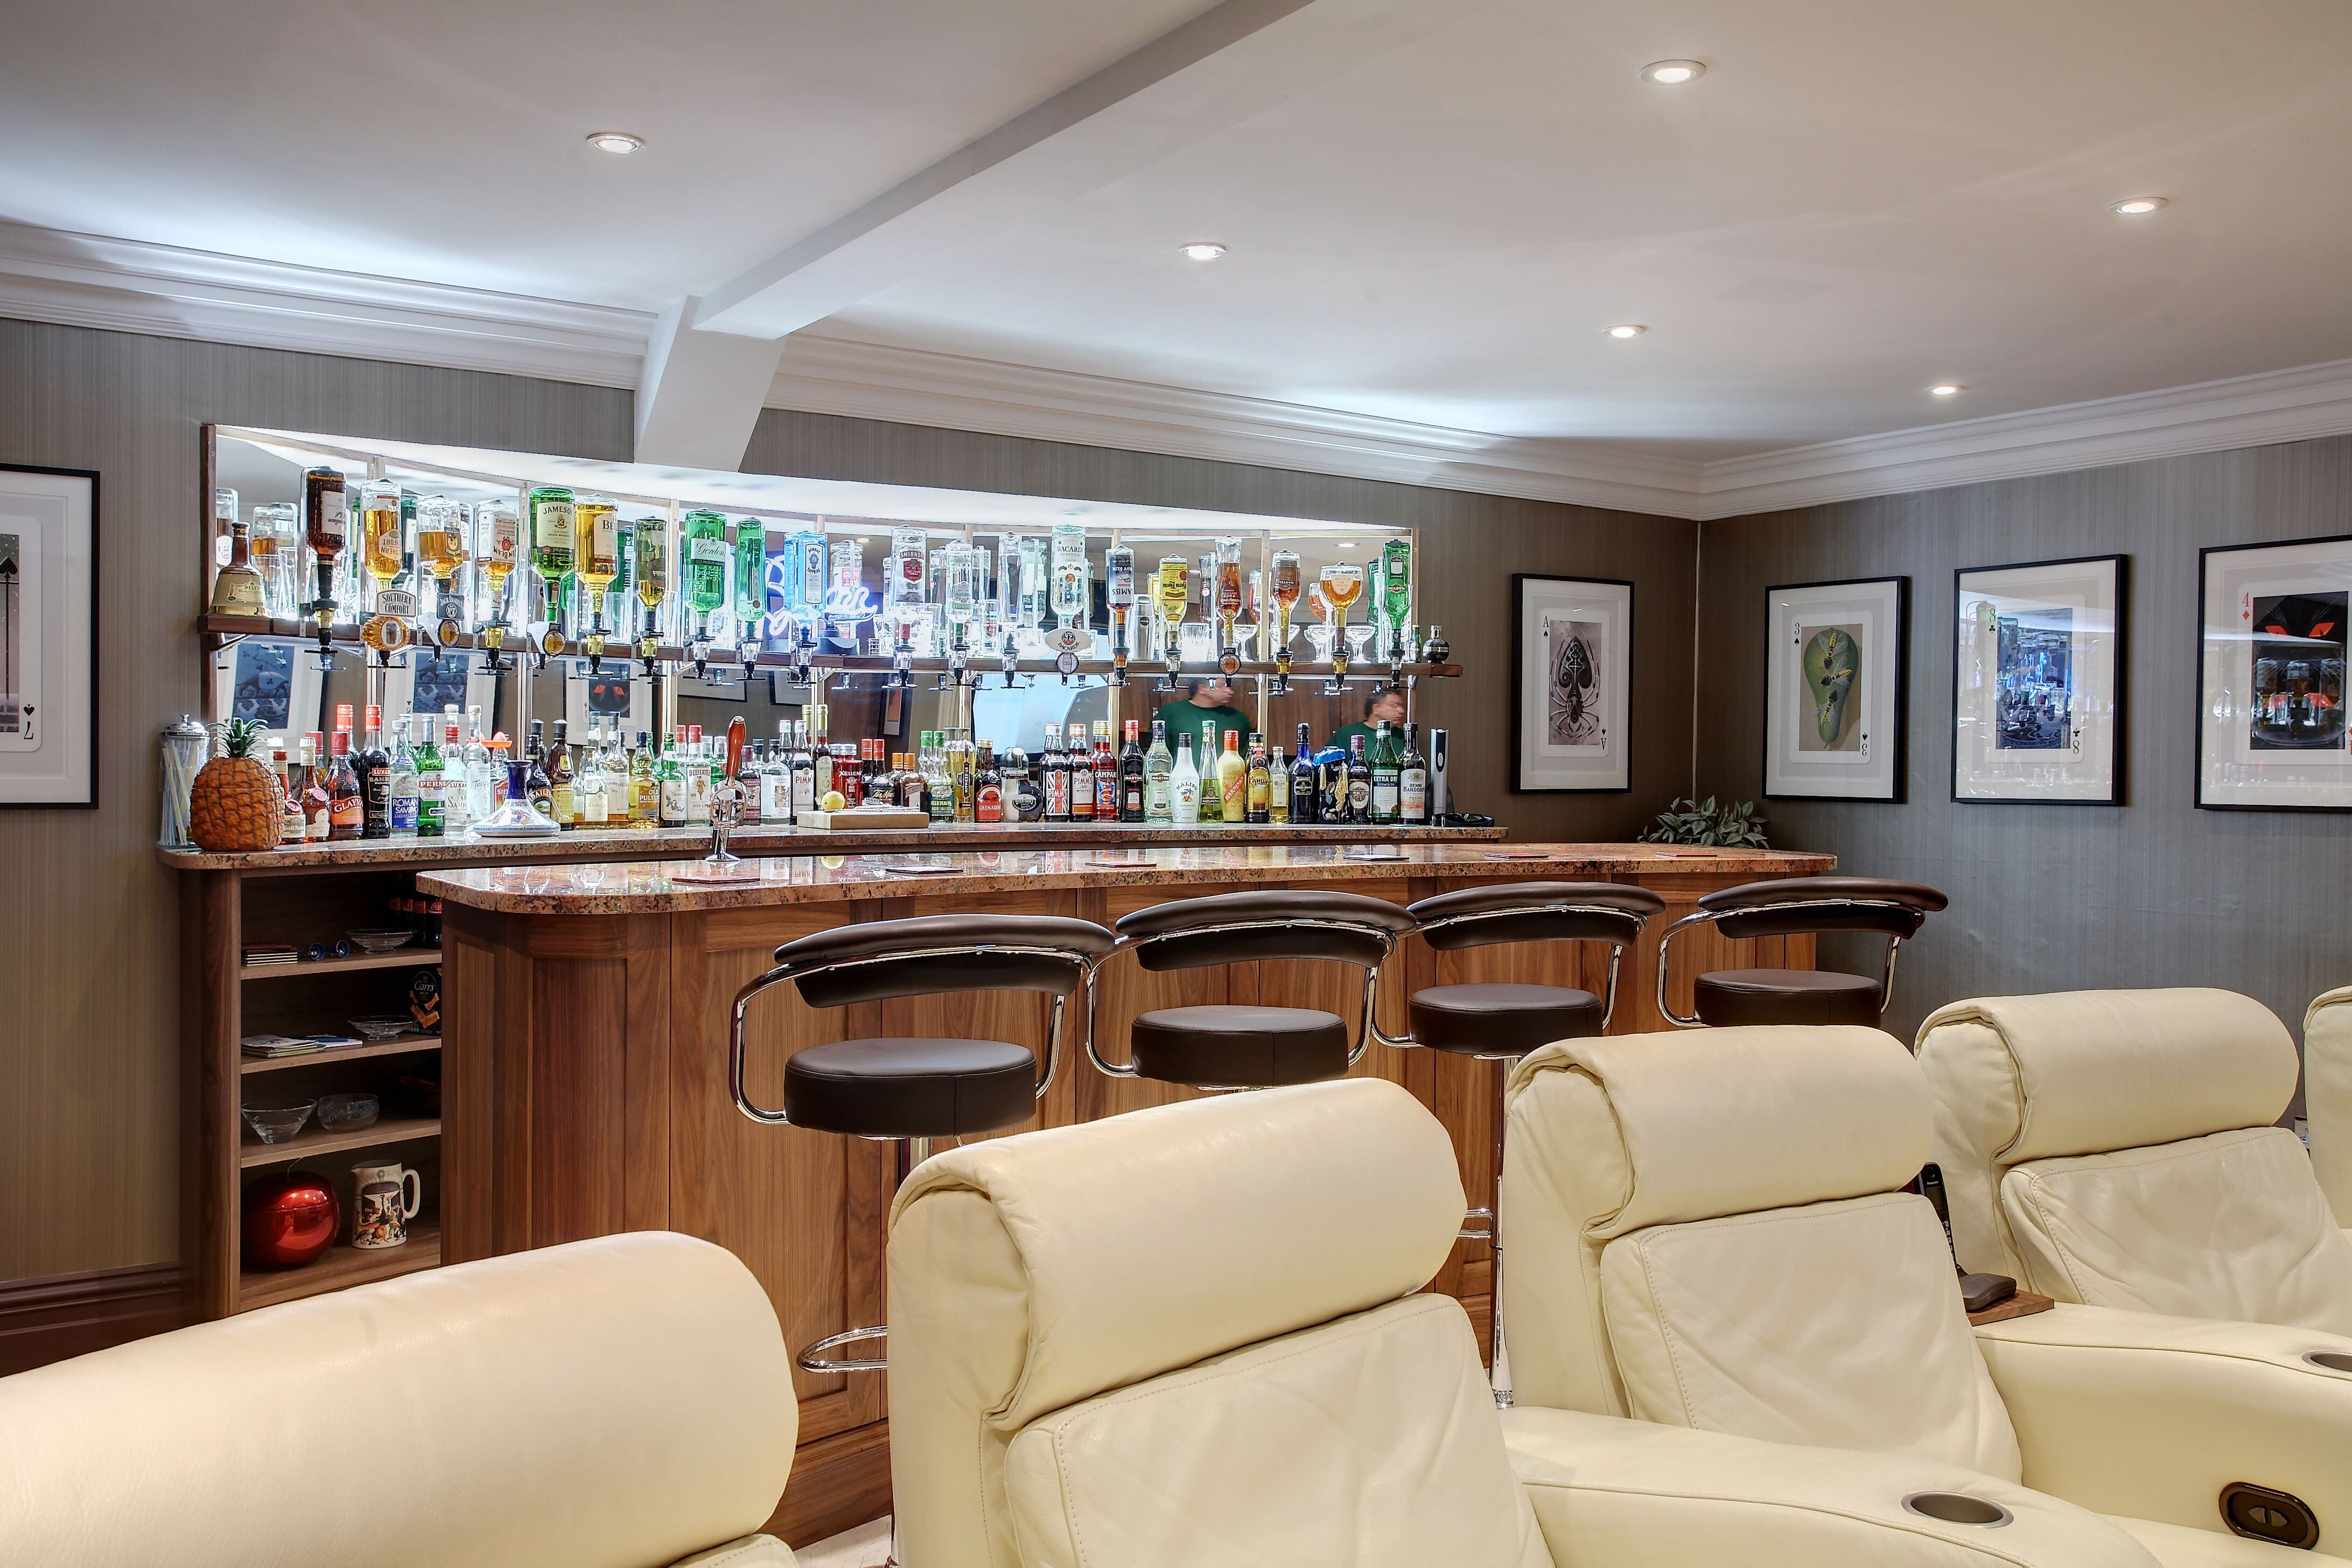 A large, bespoke personal bar. A number of bottles are backlit, leading down to a varnished wood bar. Some large cream-coloured leather chairs sit in the foreground.